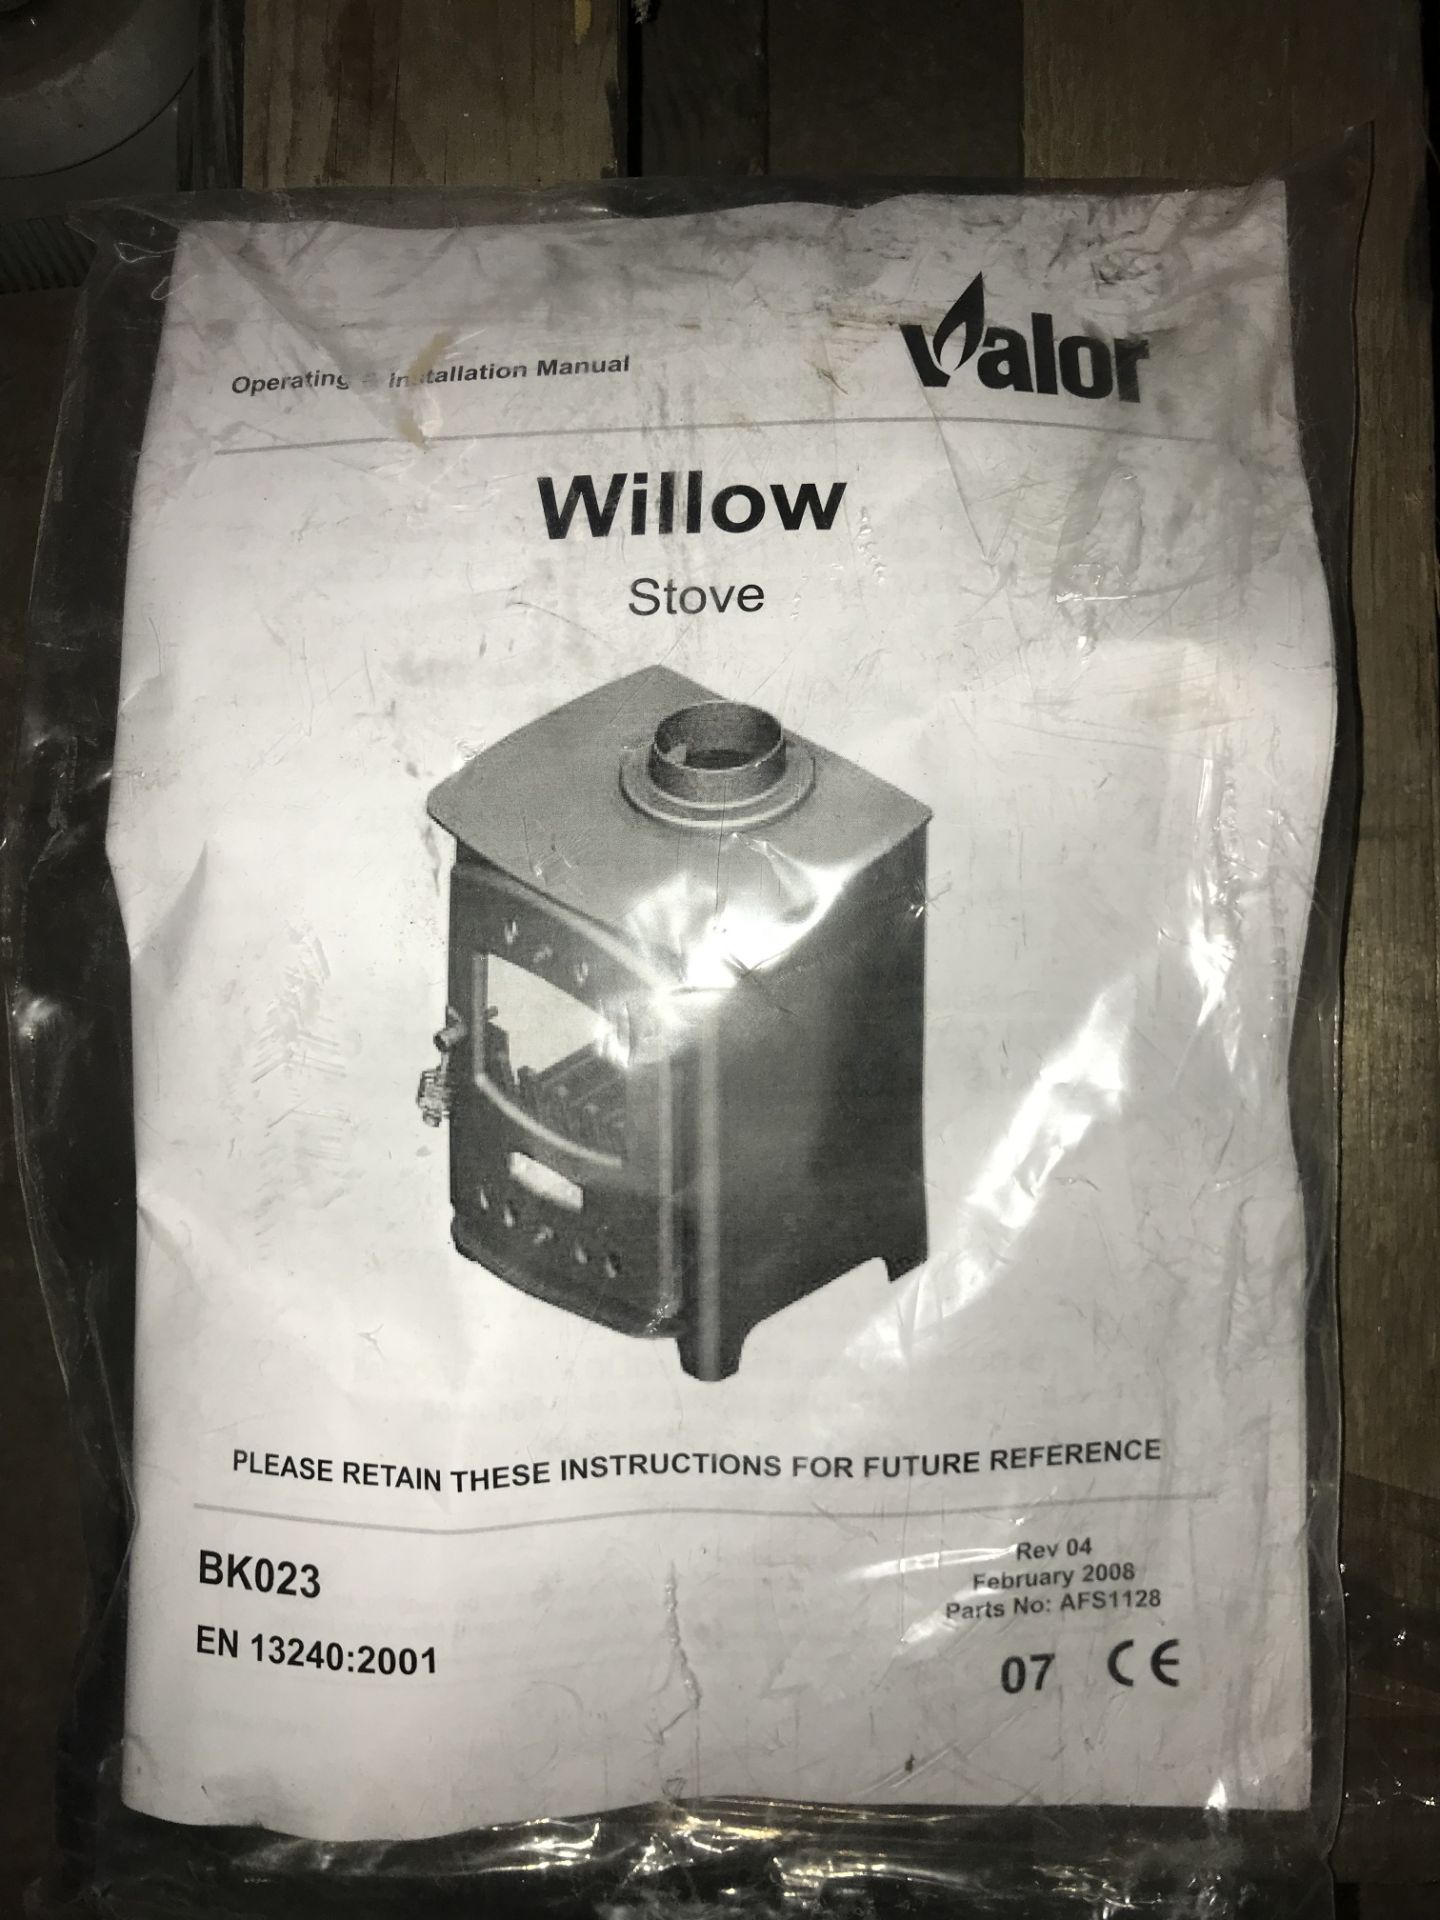 Unused Valor Willow Black Solid Fuel 4kW Stove - RRP£449.99 - Image 3 of 3